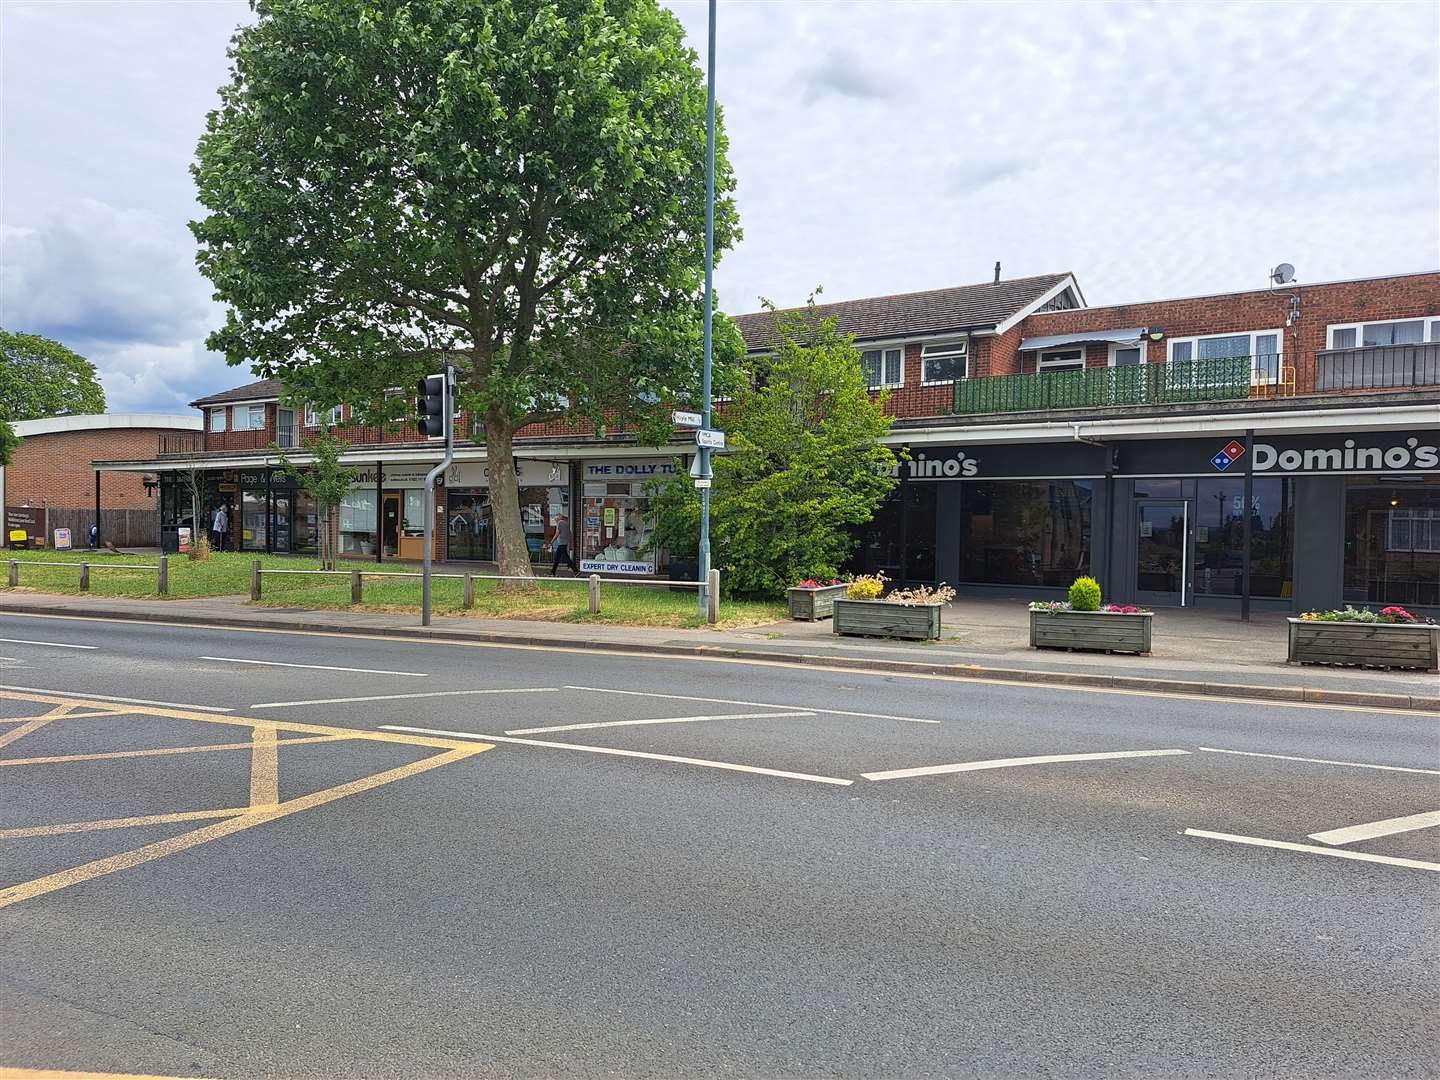 Works will no longer take place at the Swan Crossroads